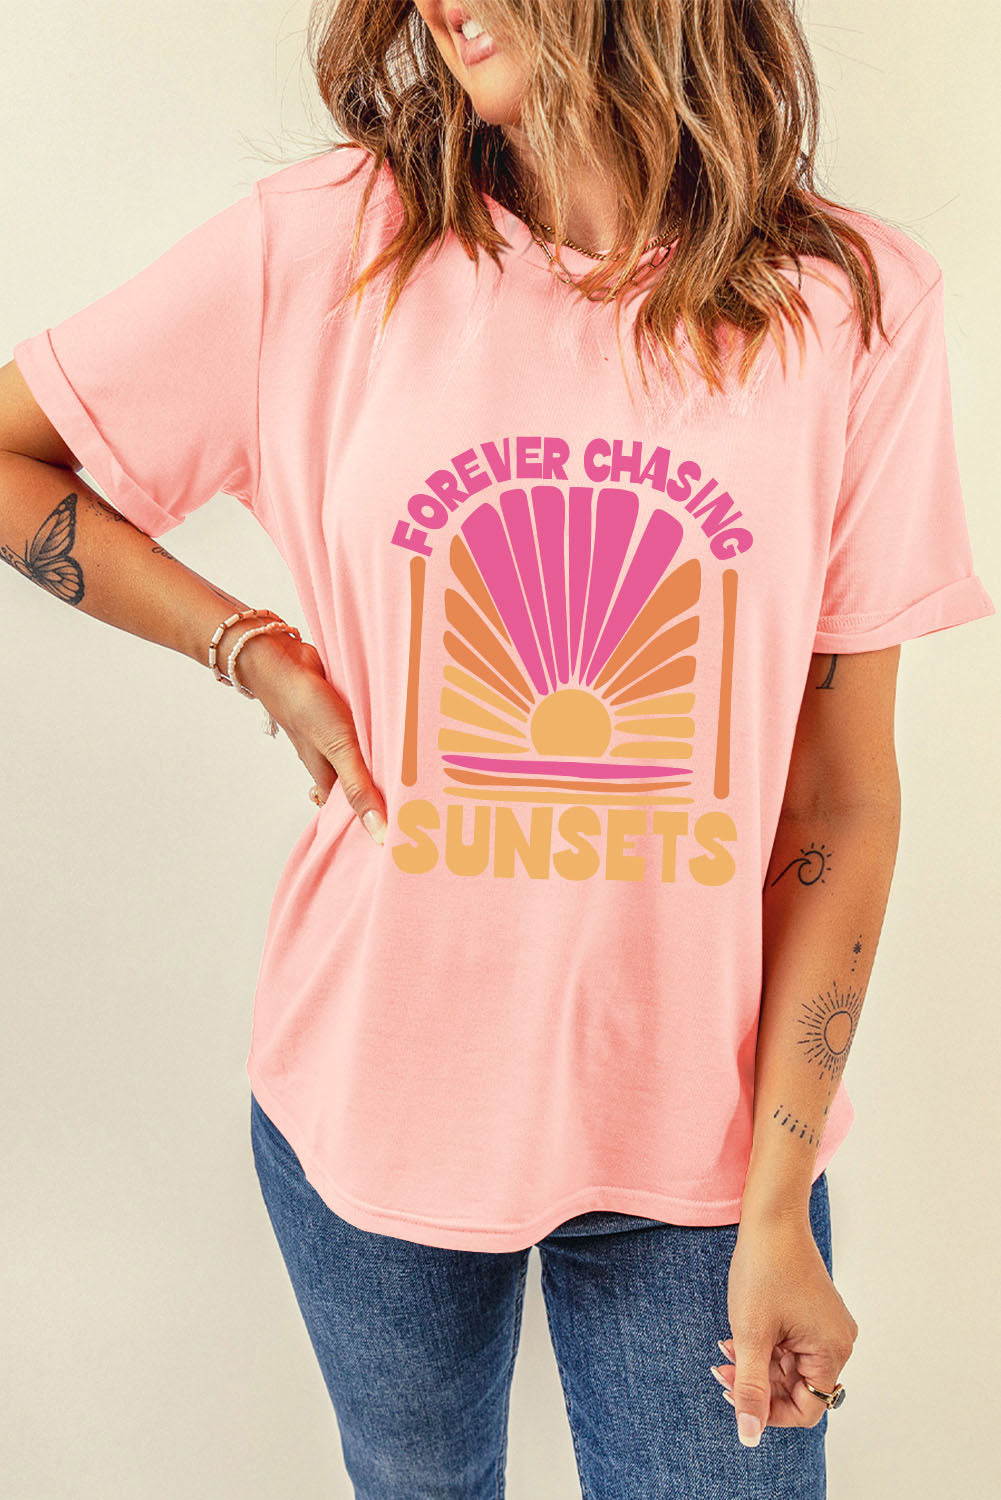 Women Forever Chasing Sunsets Round Neck T-Shirt - NicholesGifts.online